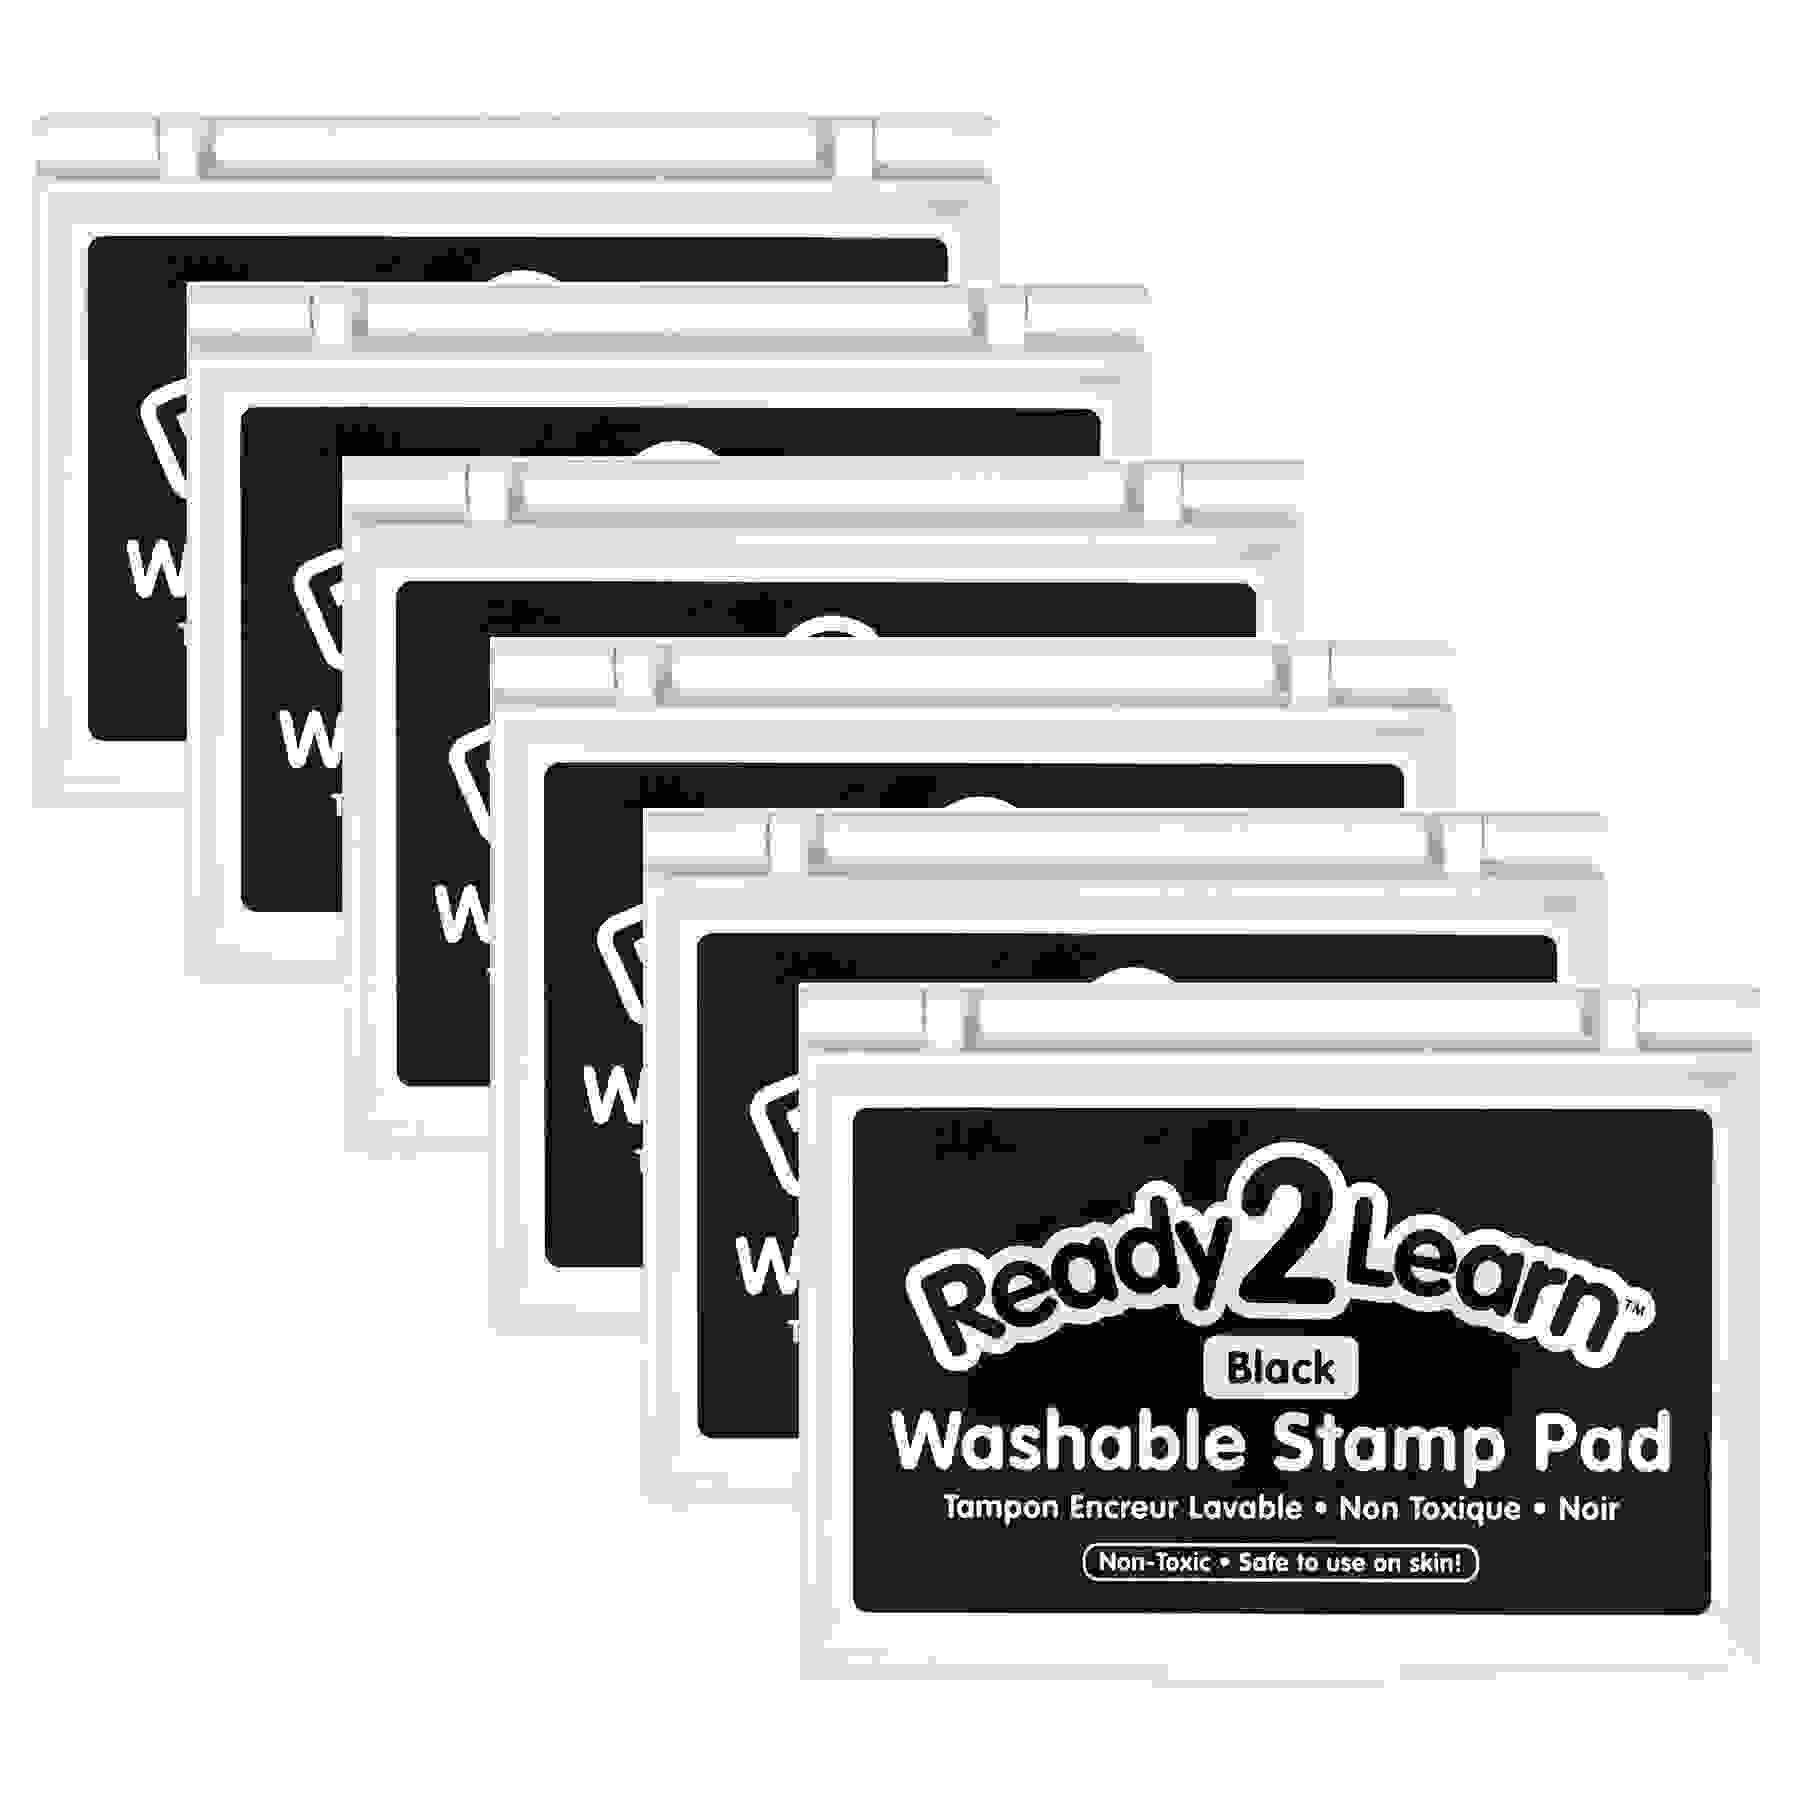 Washable Stamp Pad - Black - Pack of 6